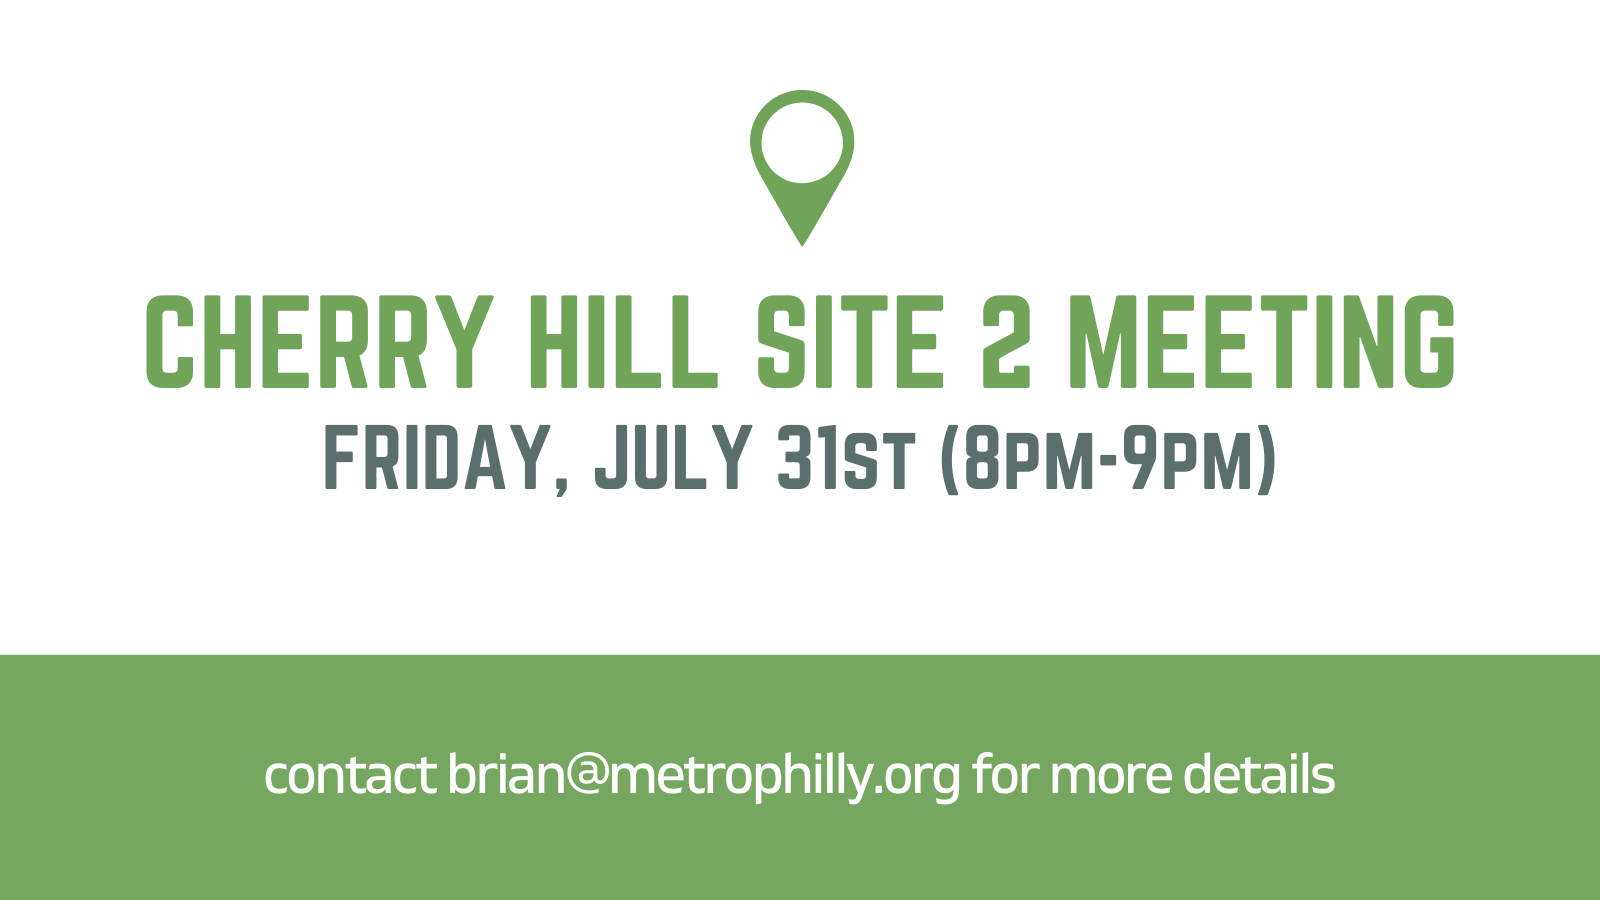 Cherry Hill Site 2 Meeting